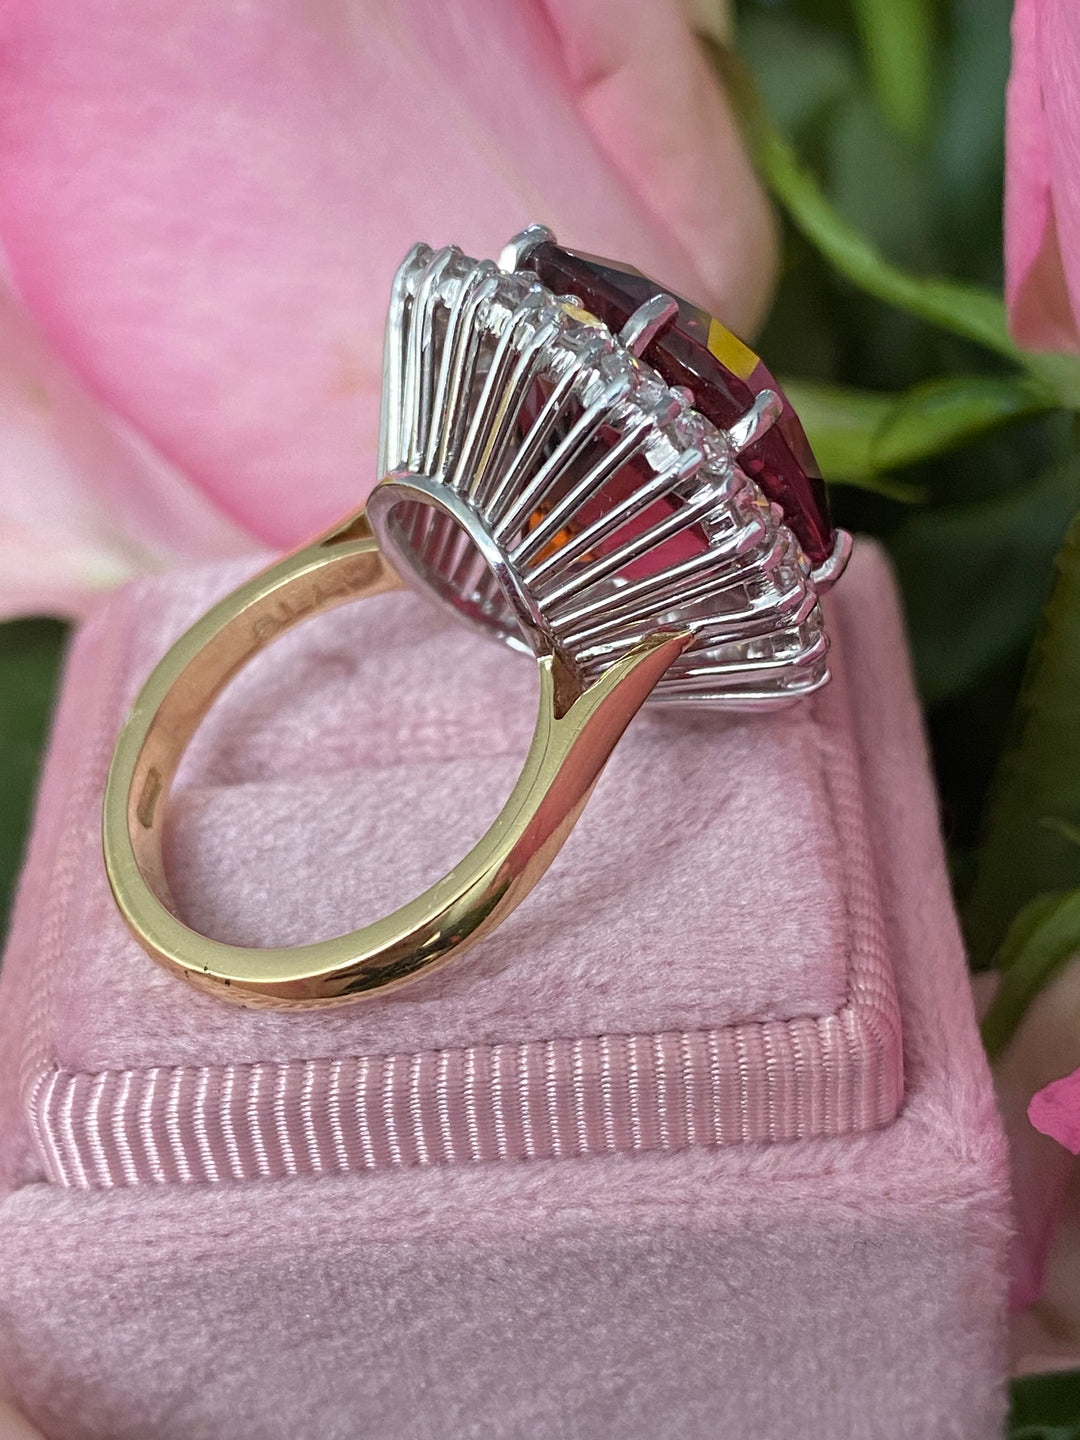 17.19 Carat Rubellite Tourmaline and Diamond Halo Cocktail Ring in 18ct White and Yellow Gold